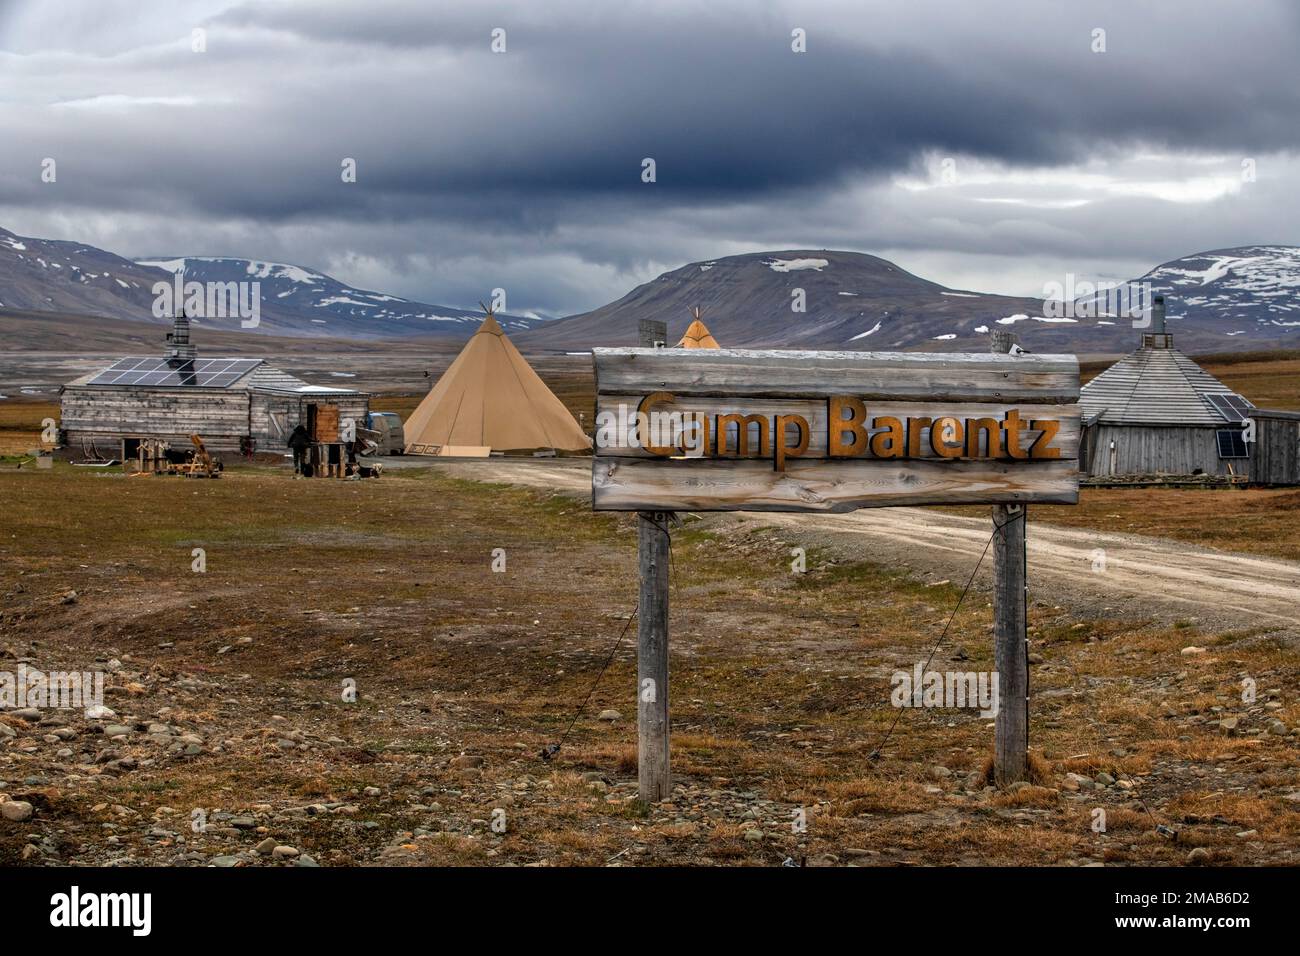 Wooden buildings at Camp Barentz just outside Longyearbyen in Svalbard. Camp Barentz is located outside Longyearbyen right below Mine 7, at the foot o Stock Photo